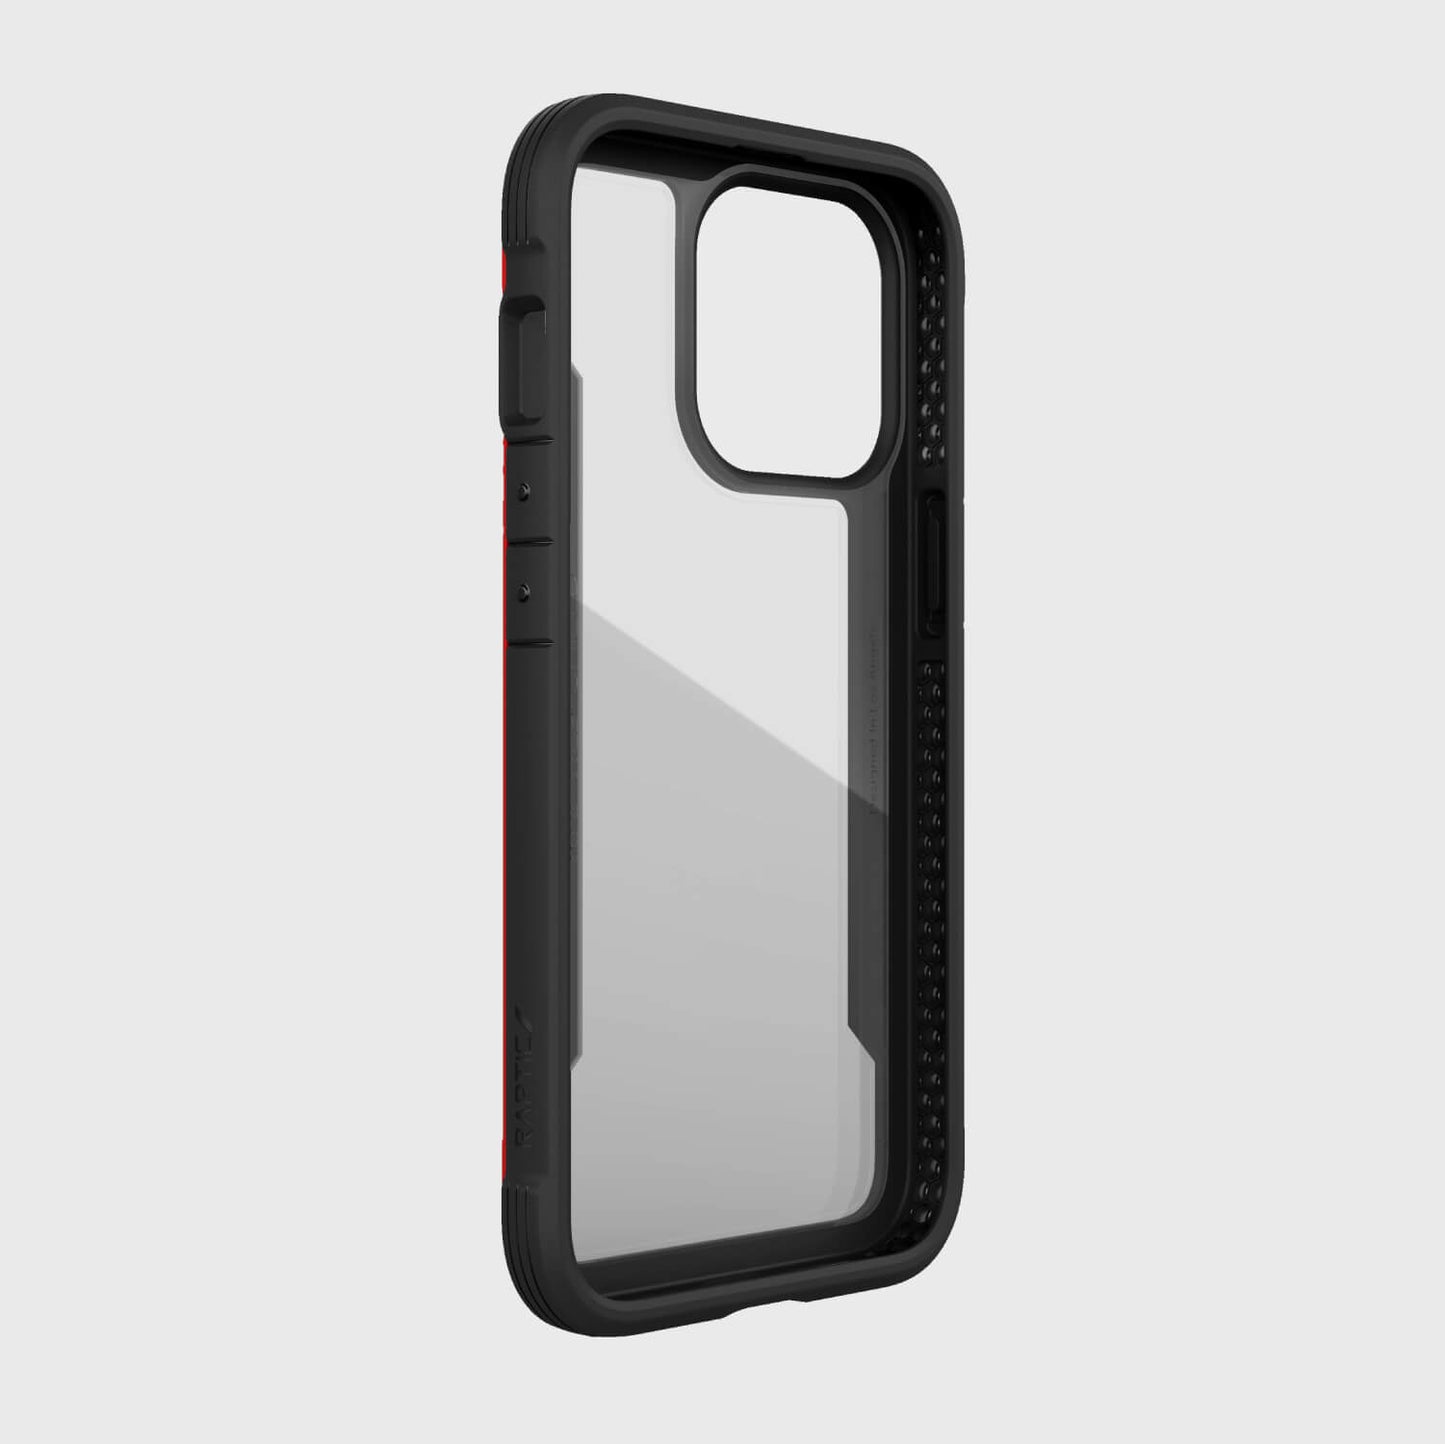 The iPhone 13 Pro Max case - SHIELD PRO by Raptic provides drop protection.